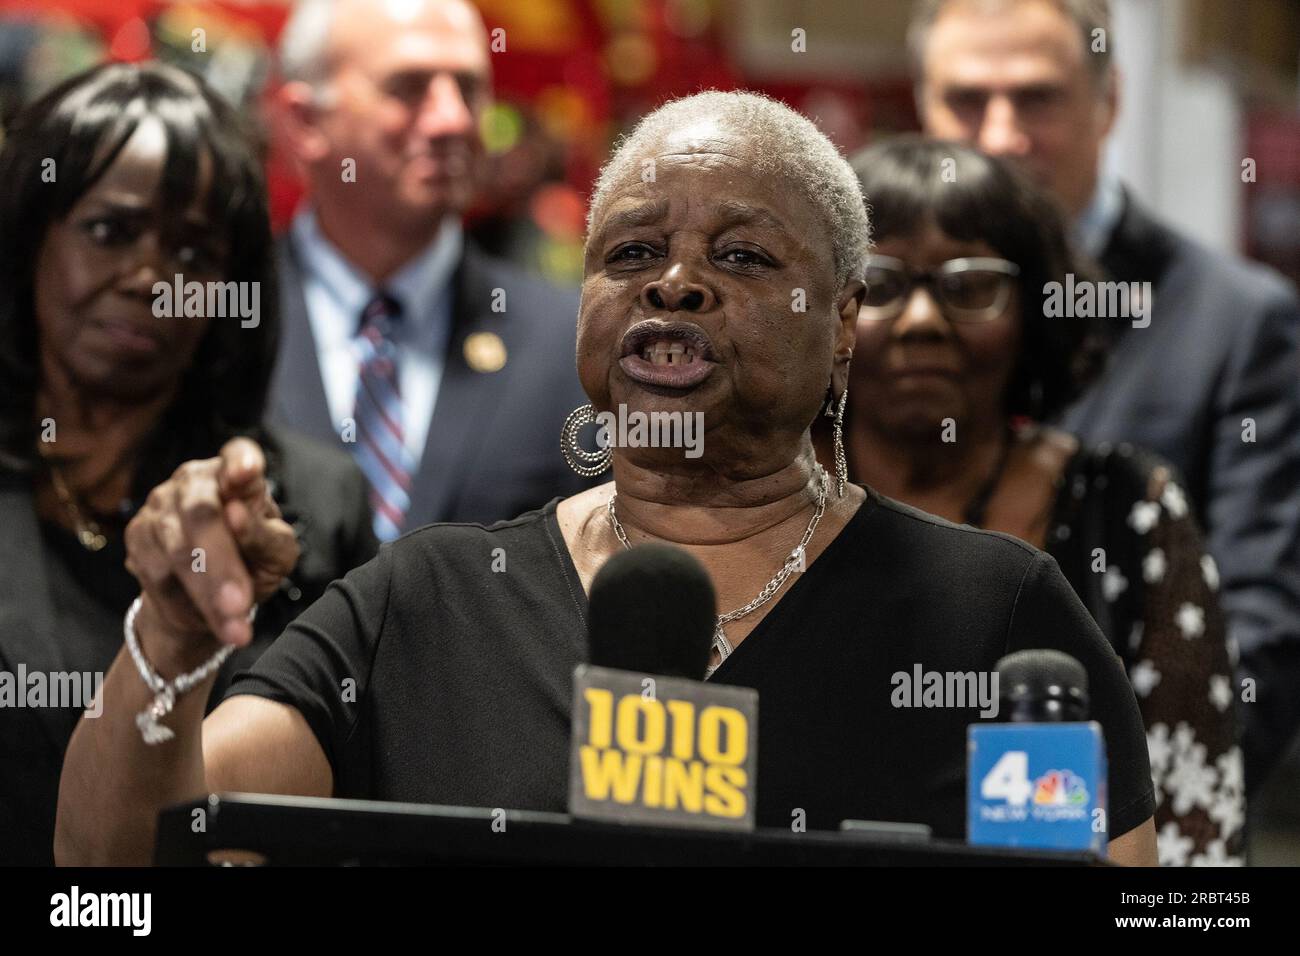 New York, USA. 10th July, 2023. Gloria Washington speaks at press conference on anniversary of Children's Crusade or Children's March as it is known at FDNY Engine 1, Ladder 24 station in New York. March was held in Birmingham, Alabama on 2 - 10 May, 1963 and was attended by more than 5,000 school children, 3 of them joined this press conference: Gloria Washington, Gwendolyn Gamble, Gwyndolyn Webb. Members of FDNY at the time stood up against the City of Birmingham fire department using force against children. (Photo by Lev Radin/Pacific Press) Credit: Pacific Press Media Production Corp./Alam Stock Photo